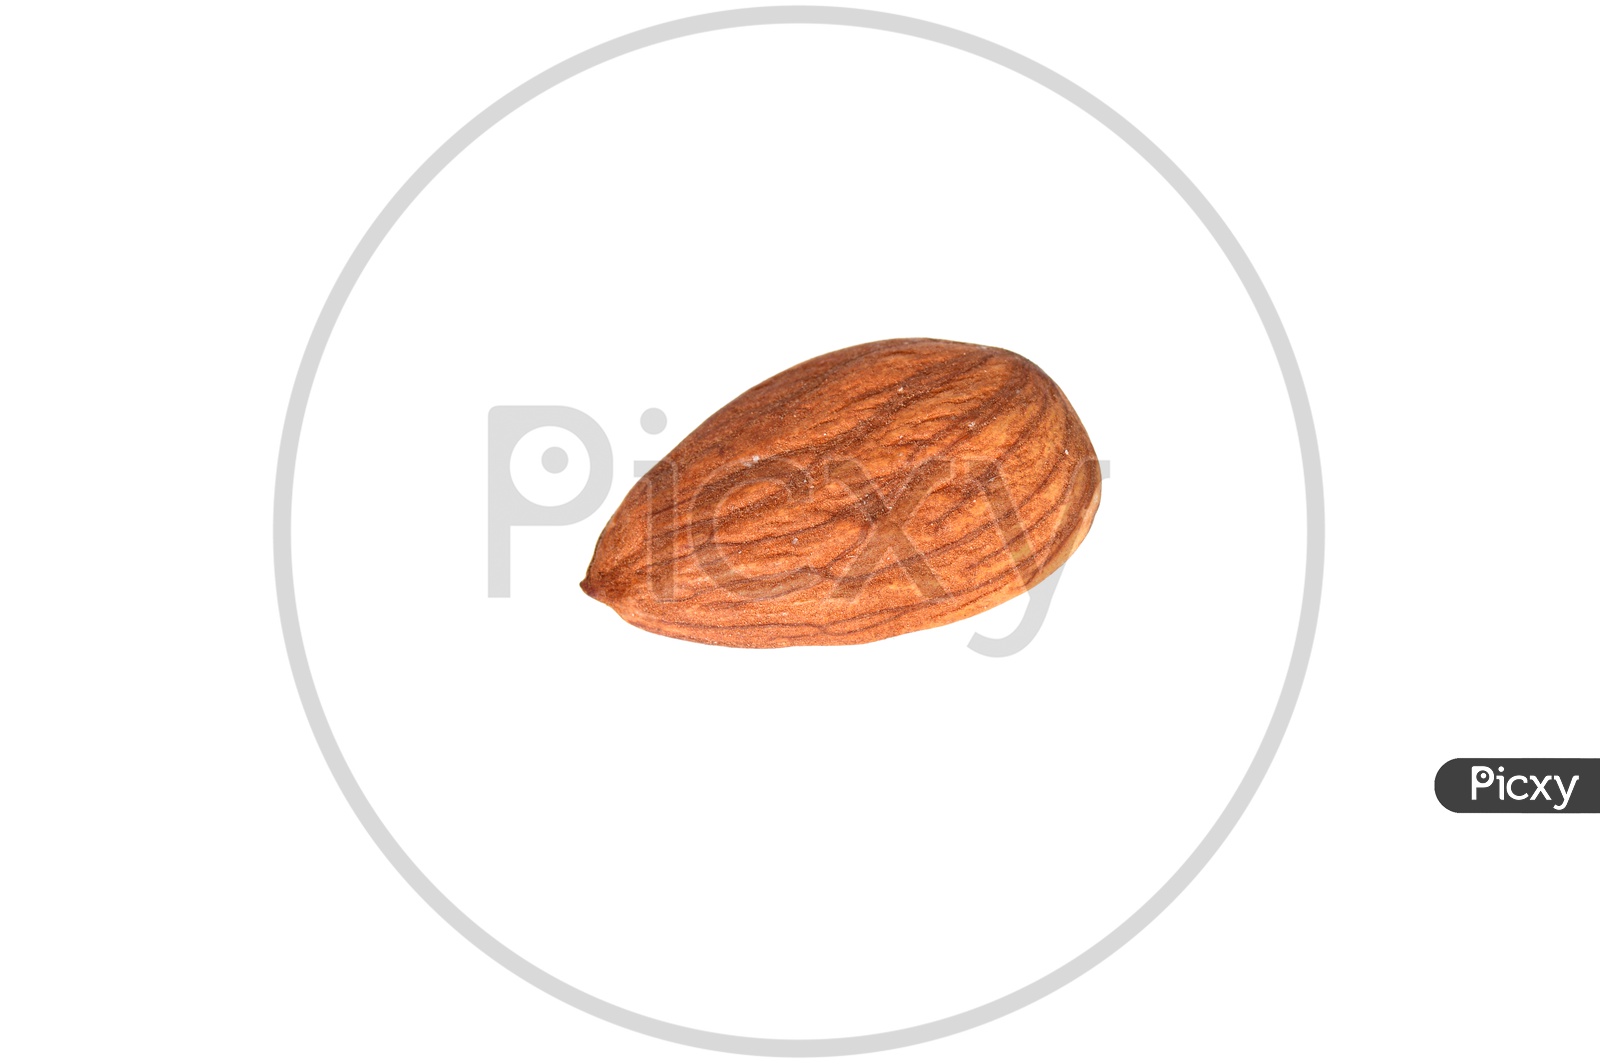 A  Single  Almond Or Badam On an Isolated White Background